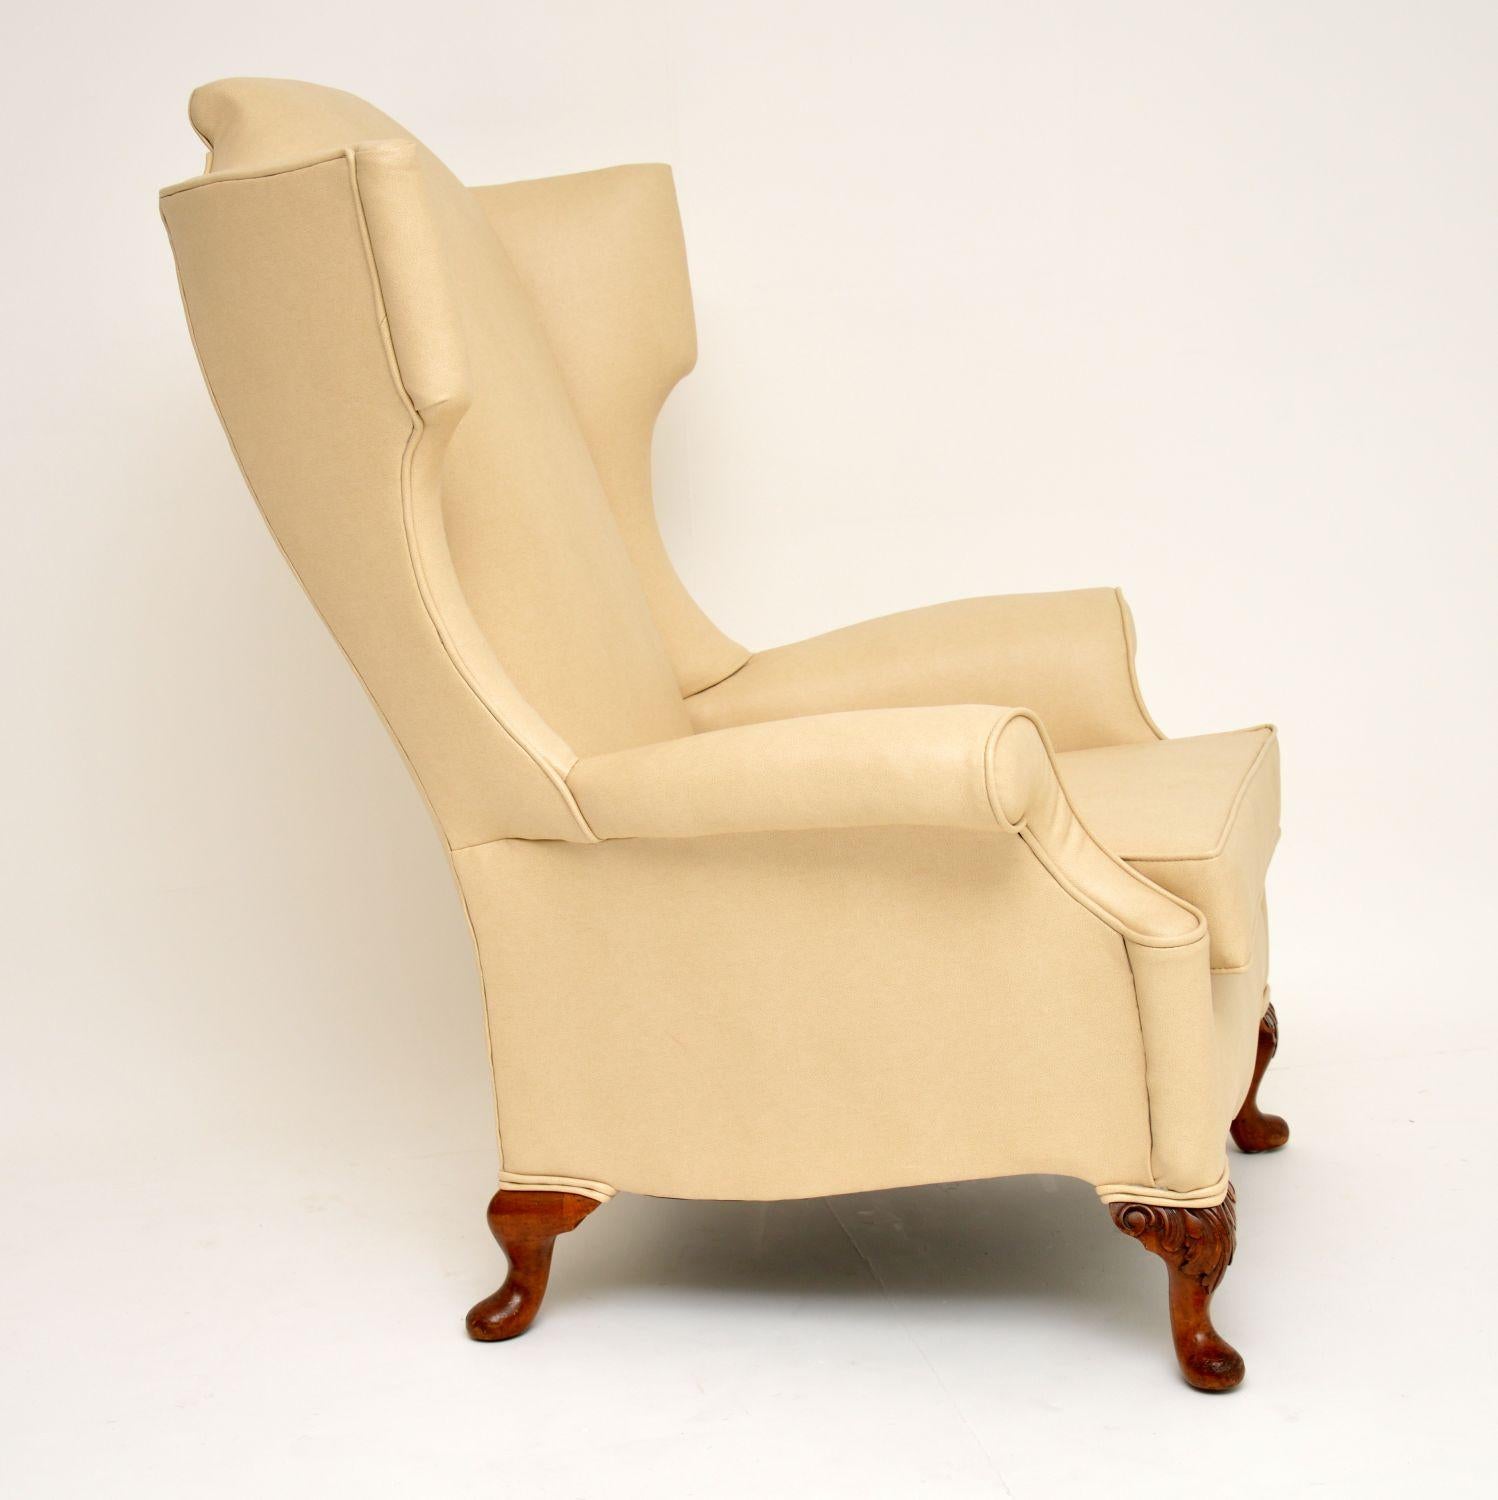 British Antique Chippendale Style Wing Back Armchair